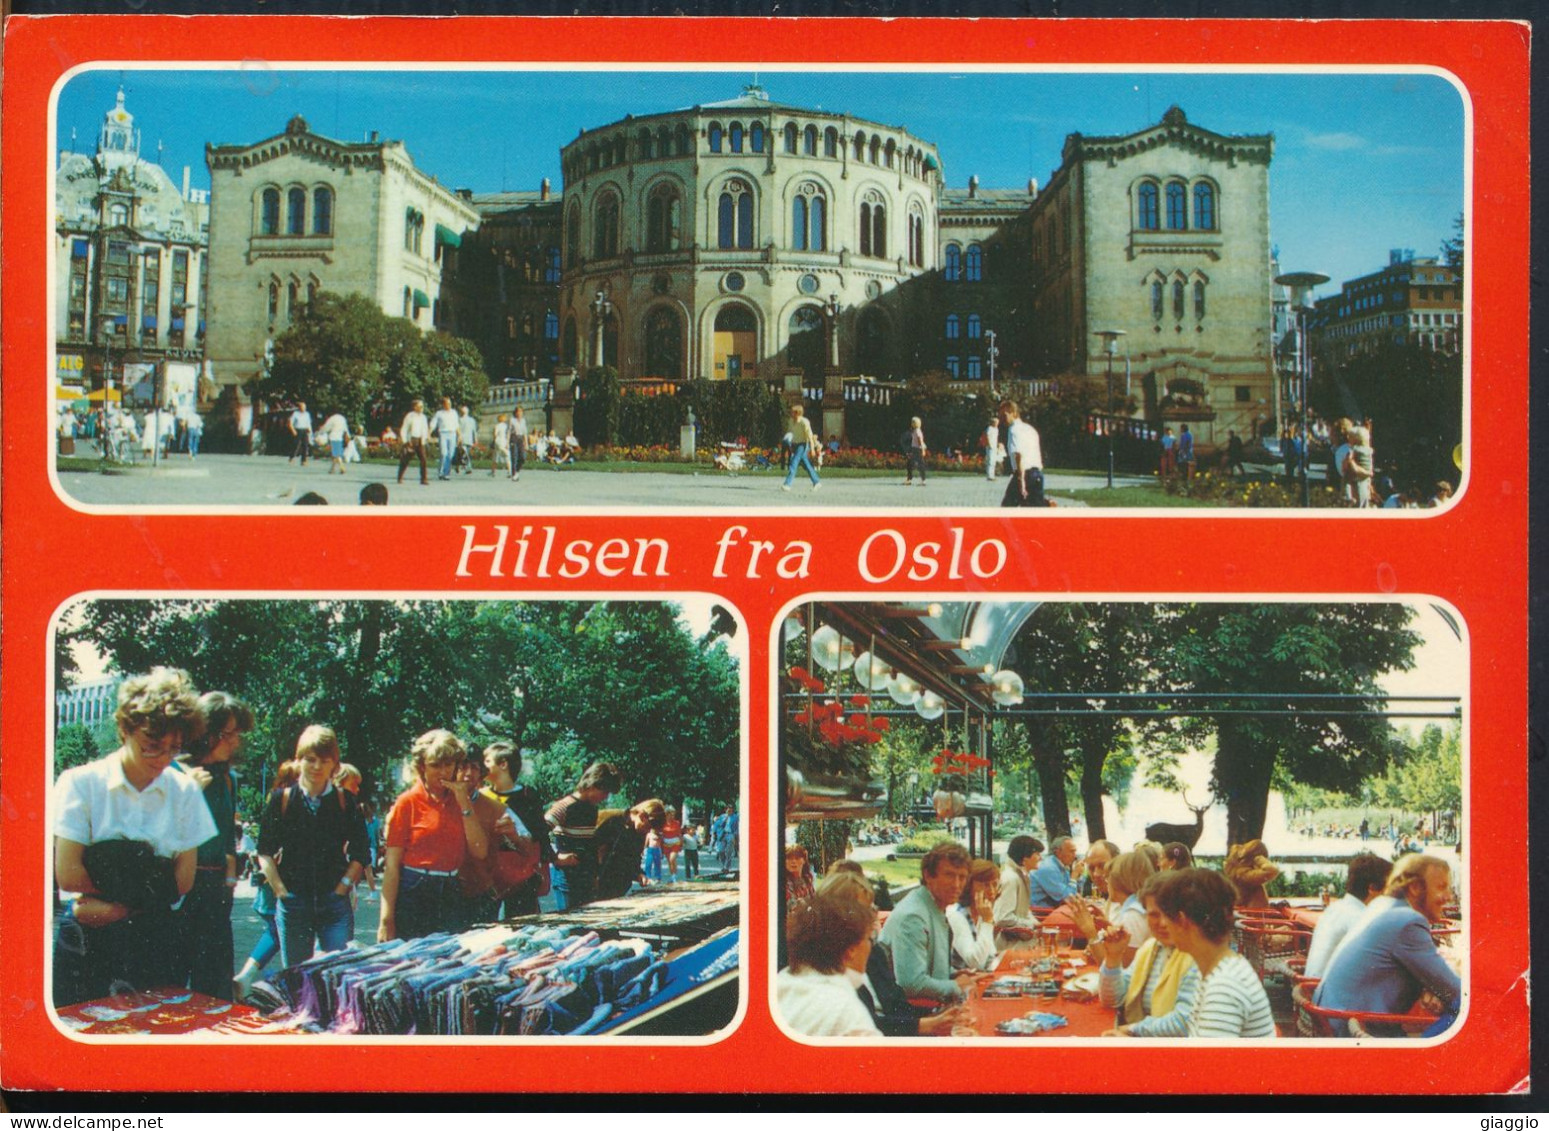 °°° 31010 - NORWAY - HILSEN FRA OSLO - 1982 With Stamps °°° - Norway